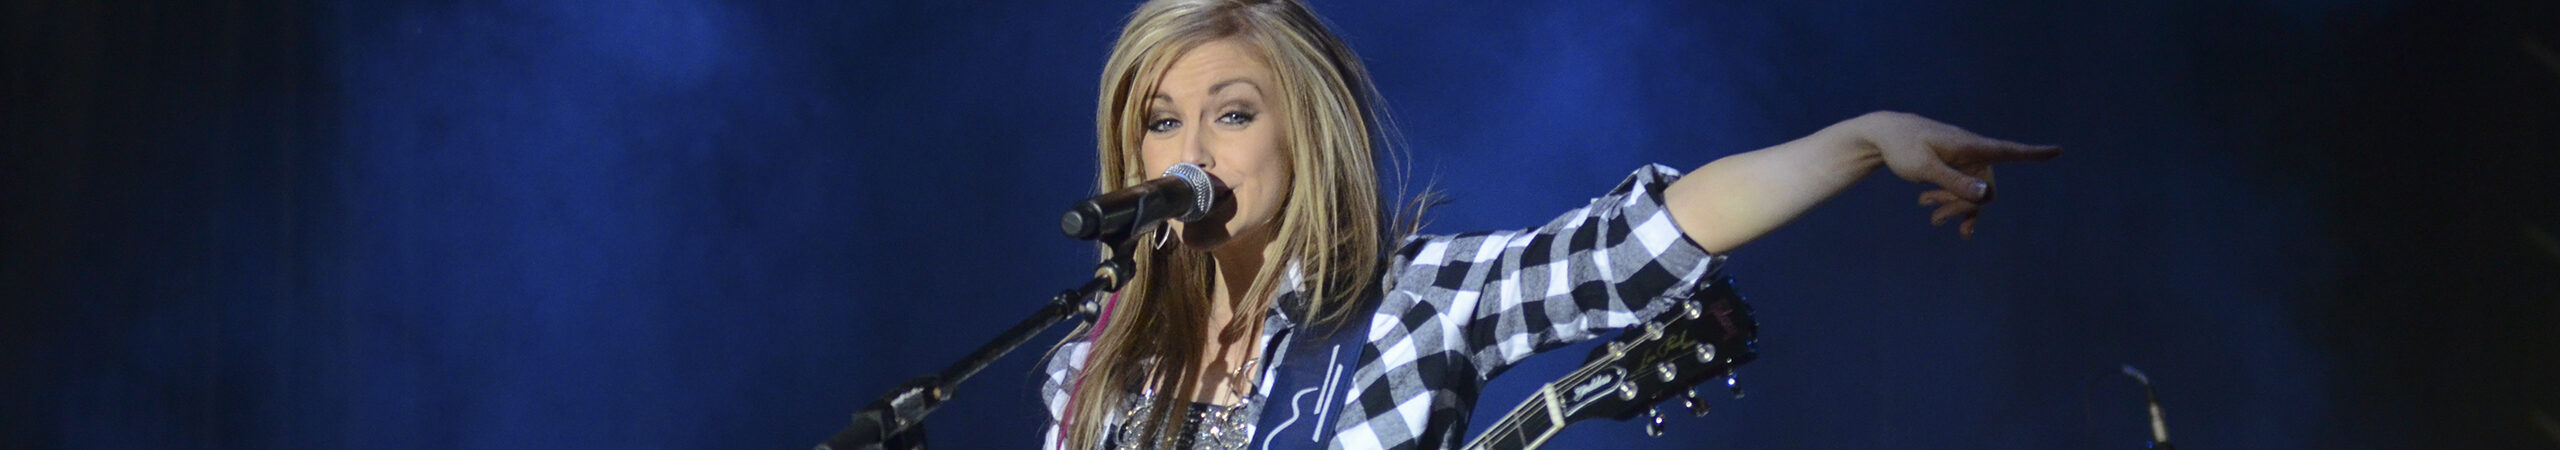 Lindsay Ell Concert at the Greater Jacksonville Fair